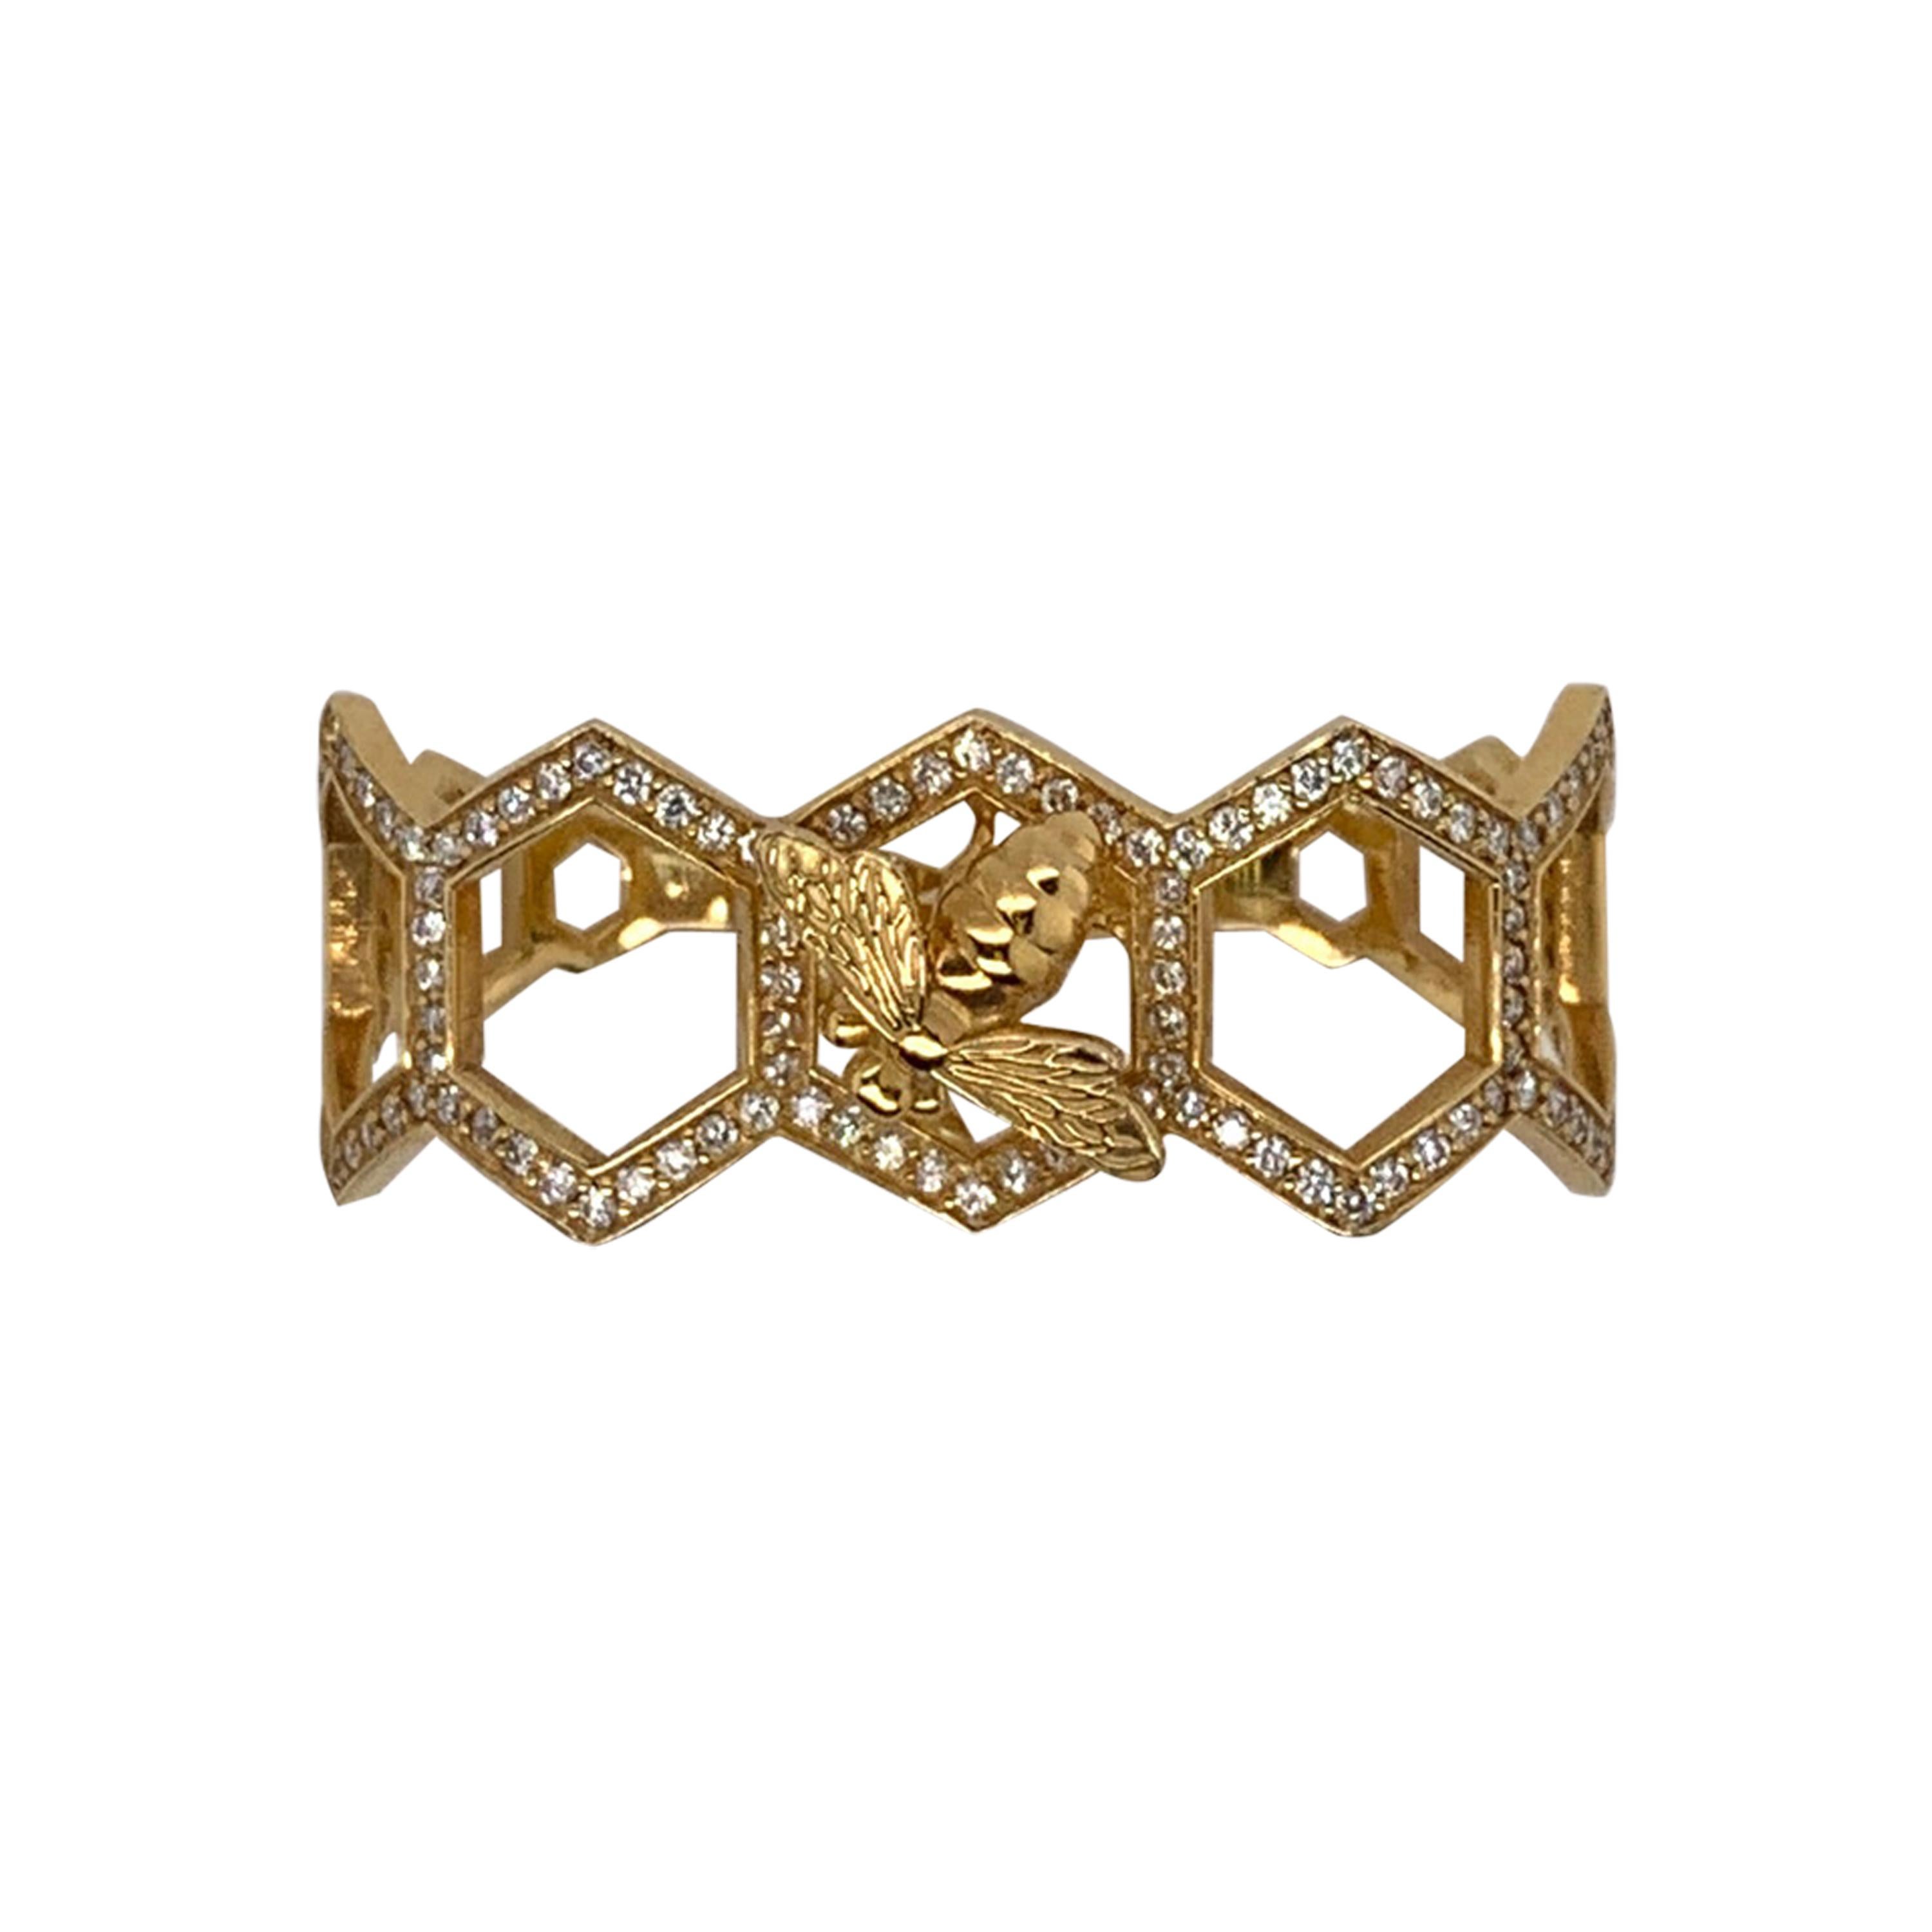 The Honeycomb Bee Ring
White Diamonds set on Yellow Gold.
Crafted to order. Please allow up to 3 weeks for delivery.